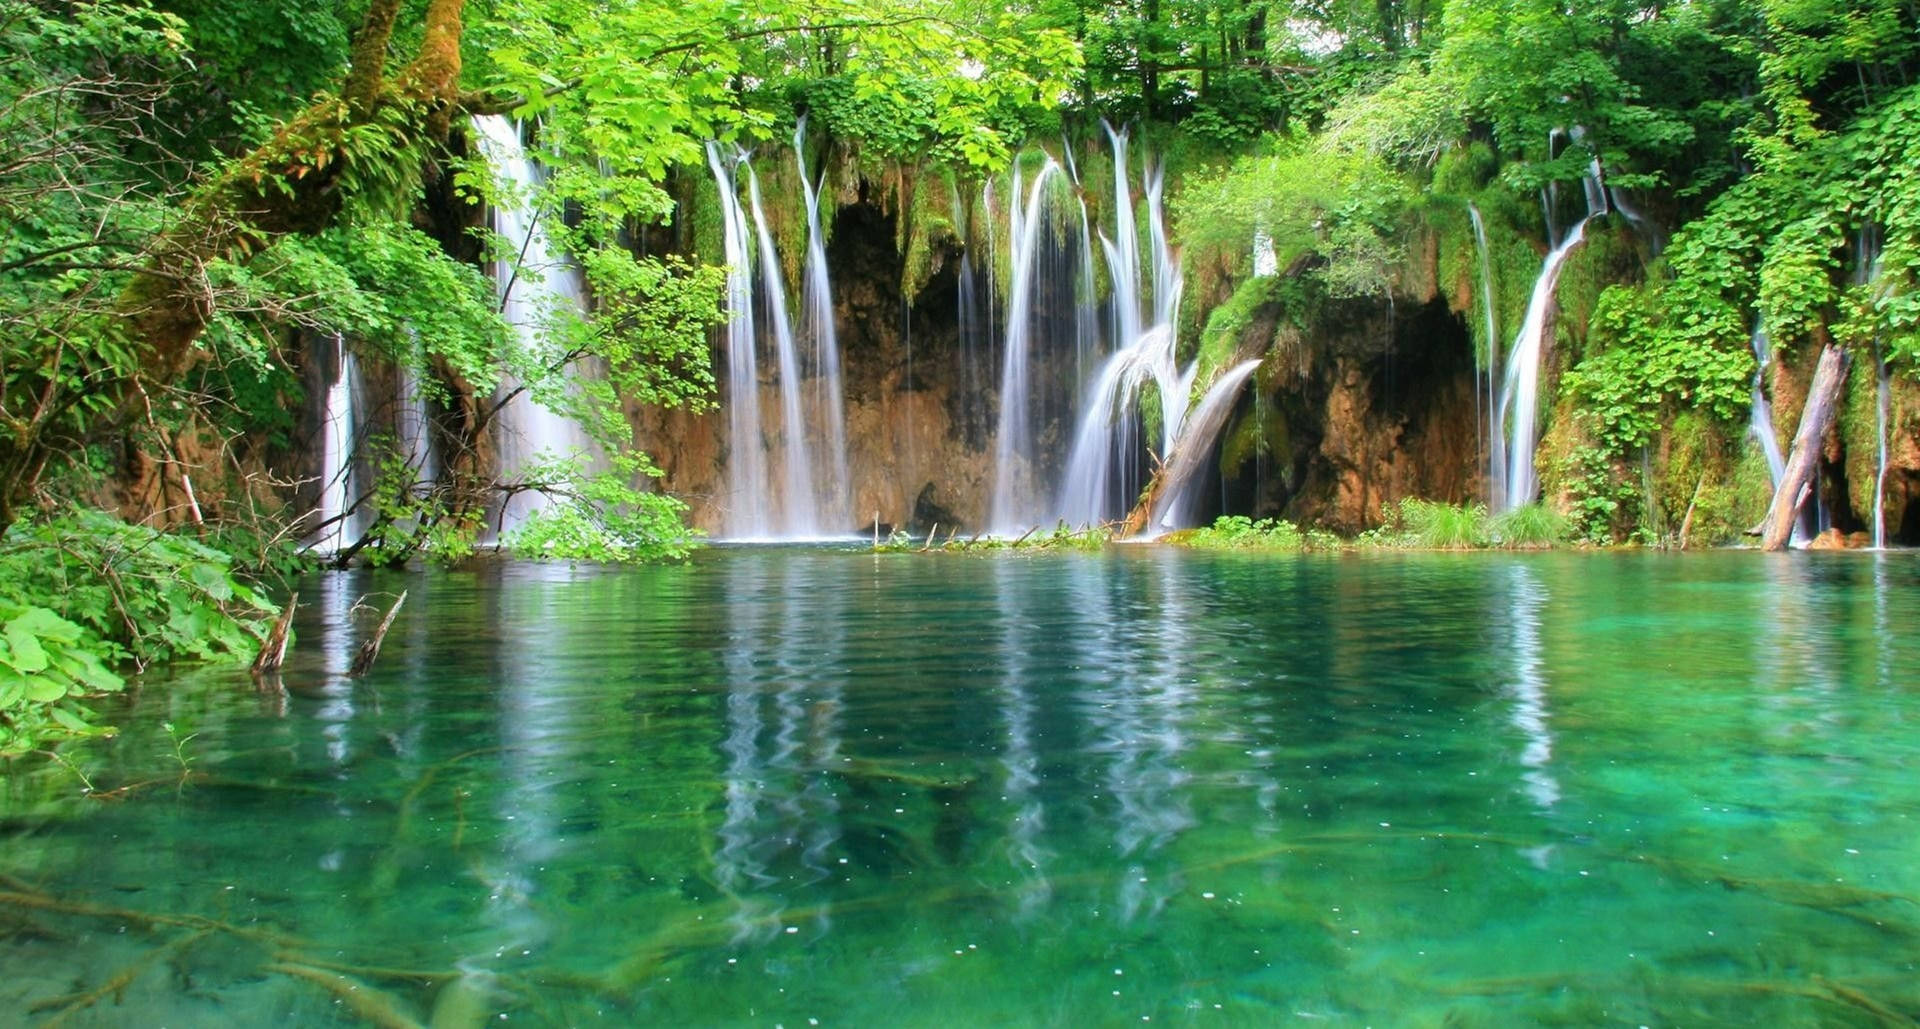 The Plitvice Lakes National Park HD Waterfall Wallpaper